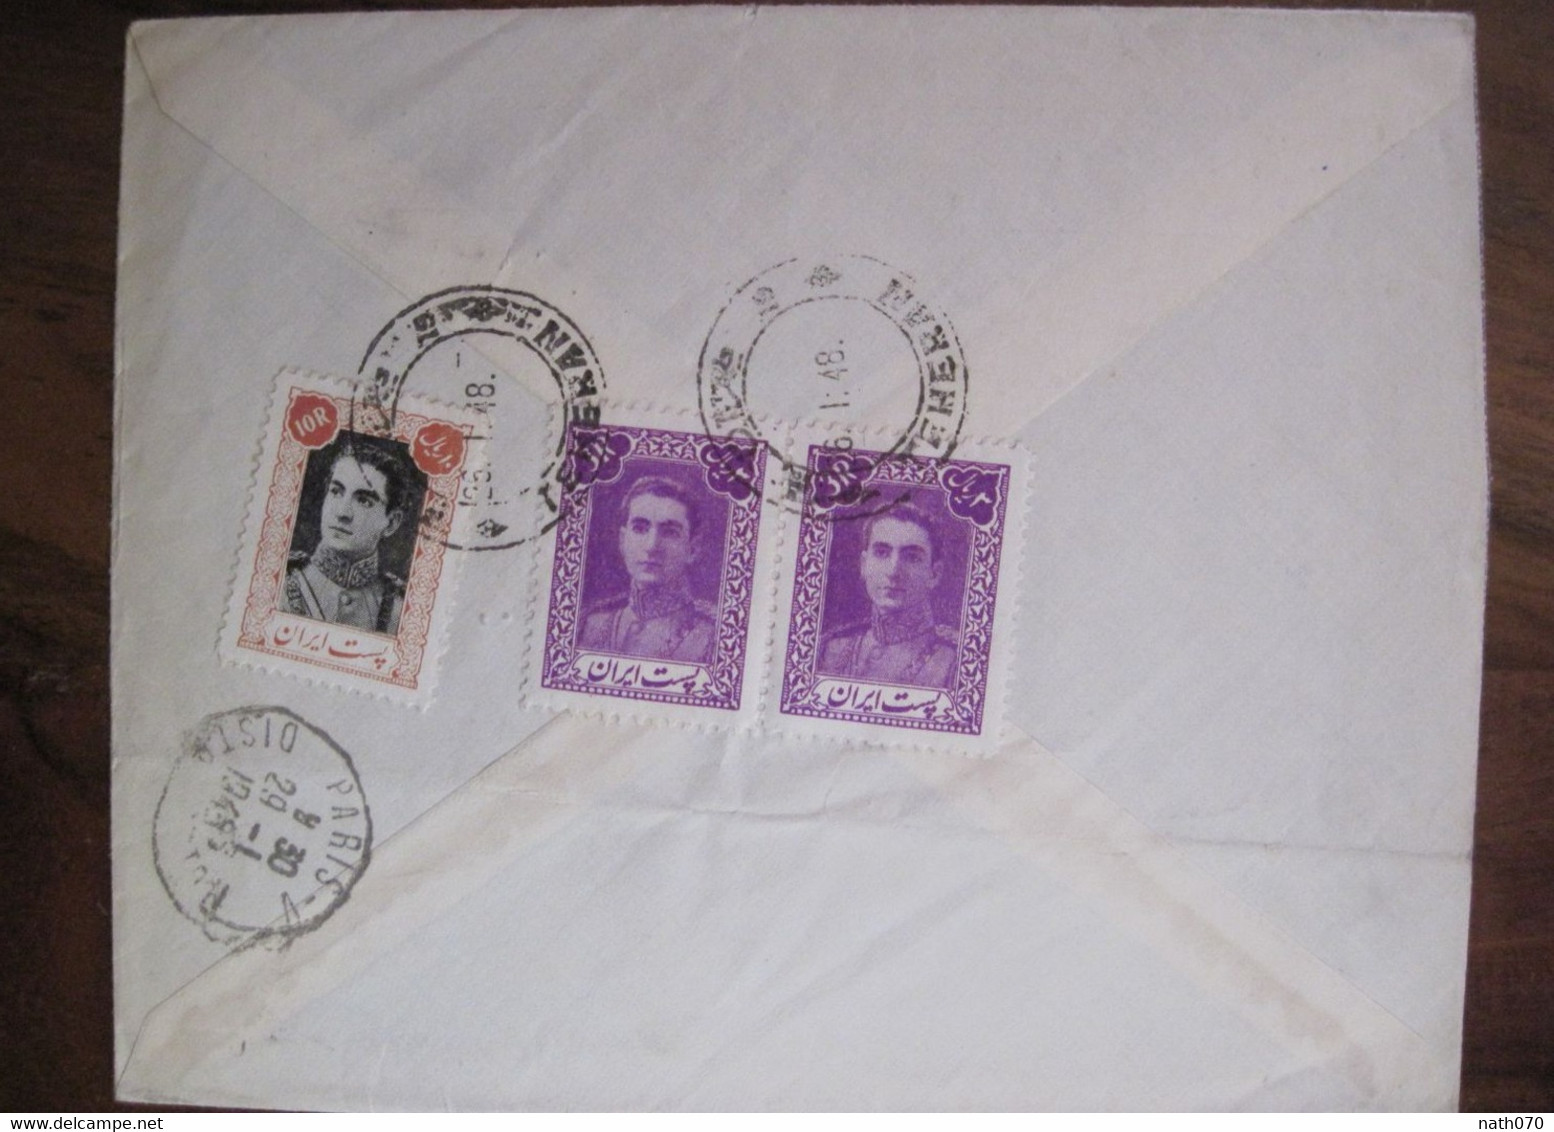 Iran Perse 1948 France Levant Express Transport Cover Enveloppe Air Mail Poste Aerienne Persia Paire - Irán